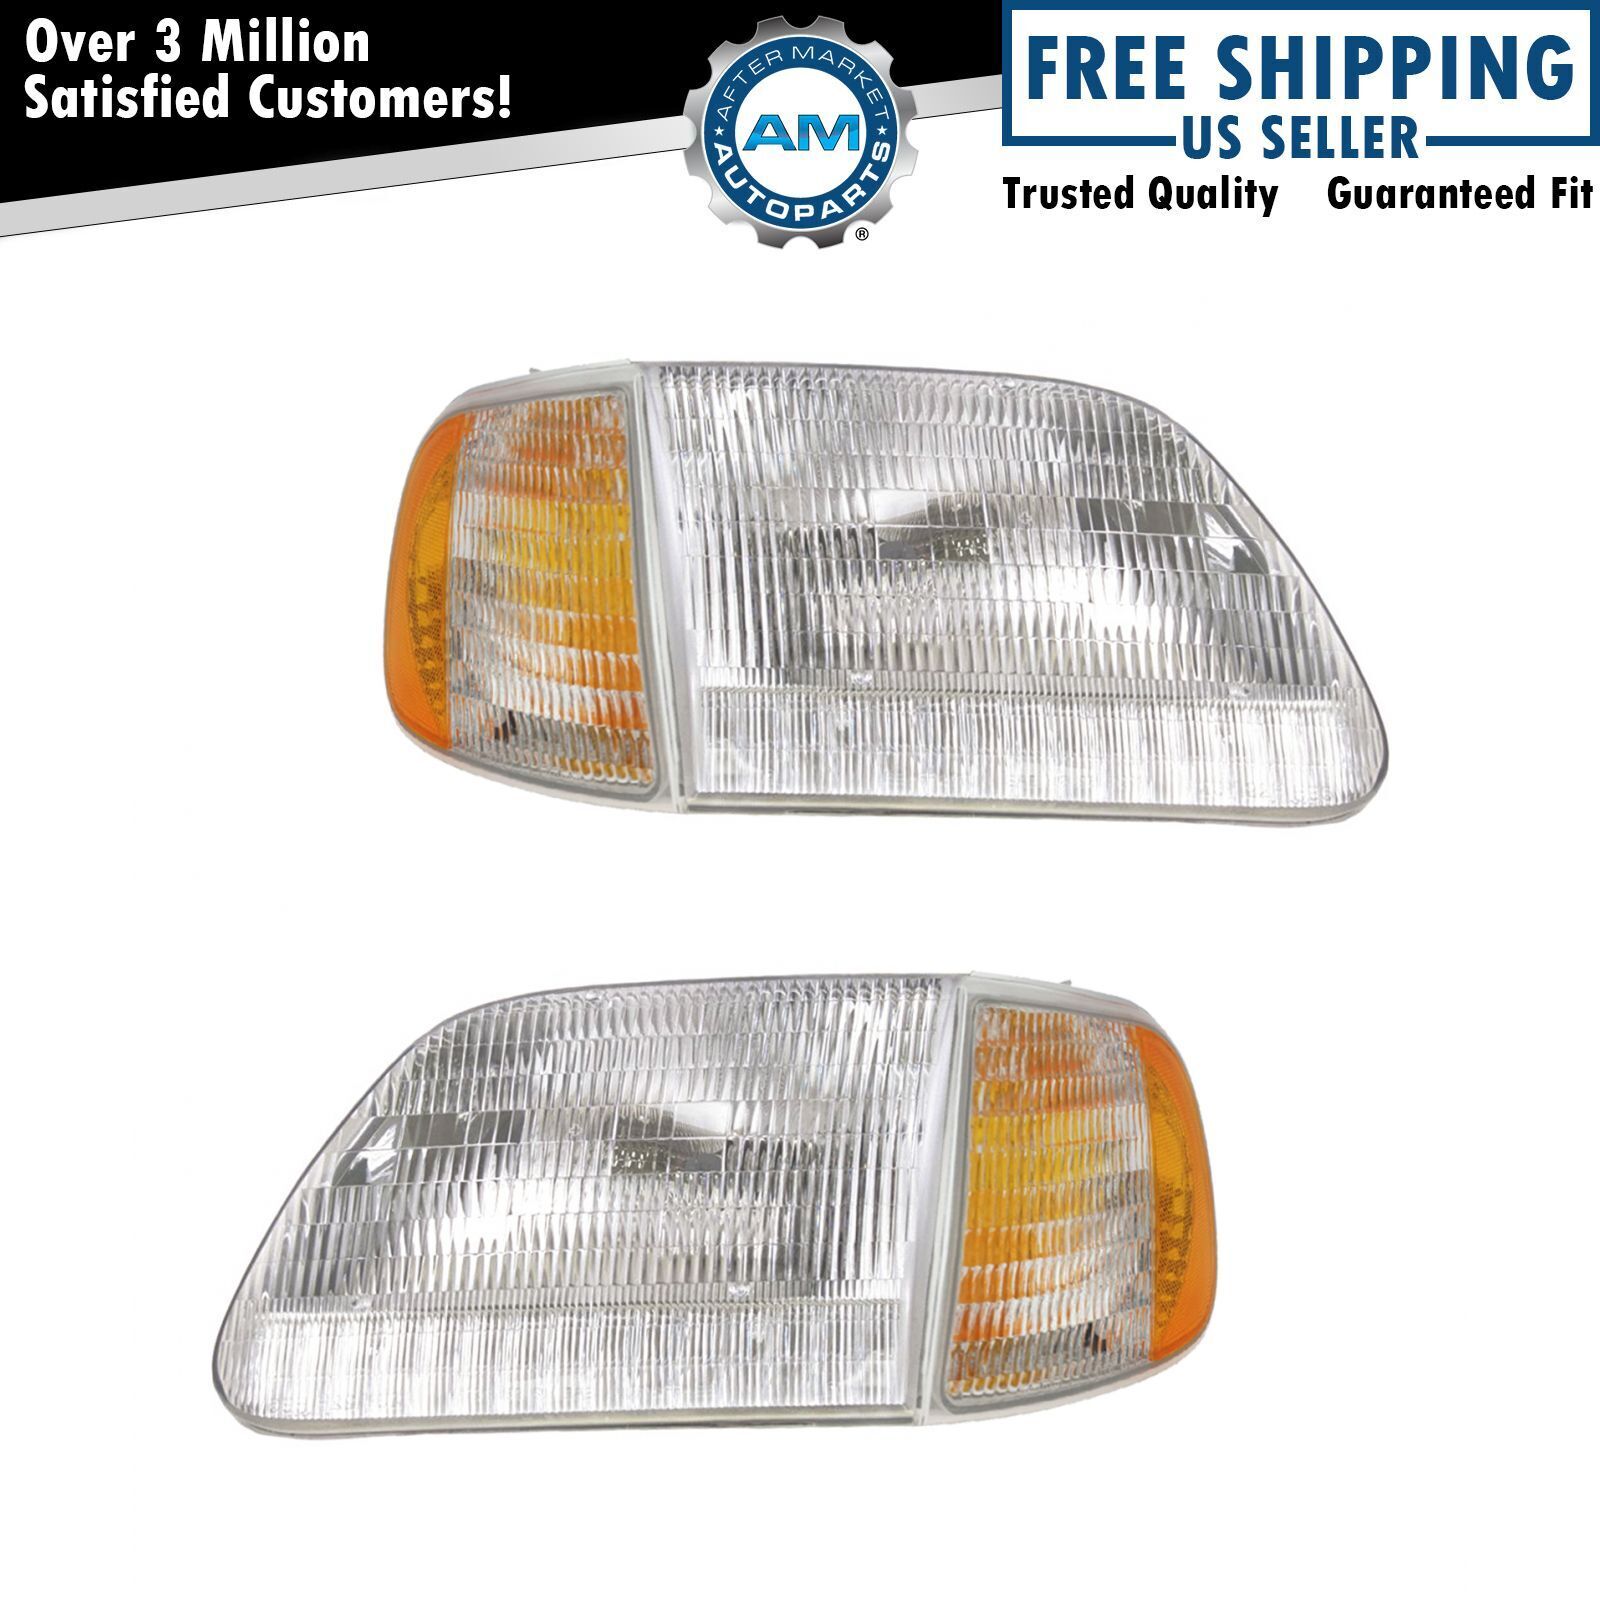 Headlight & Parking Corner Light Left & Right Pair Set for Ford Truck Expedition